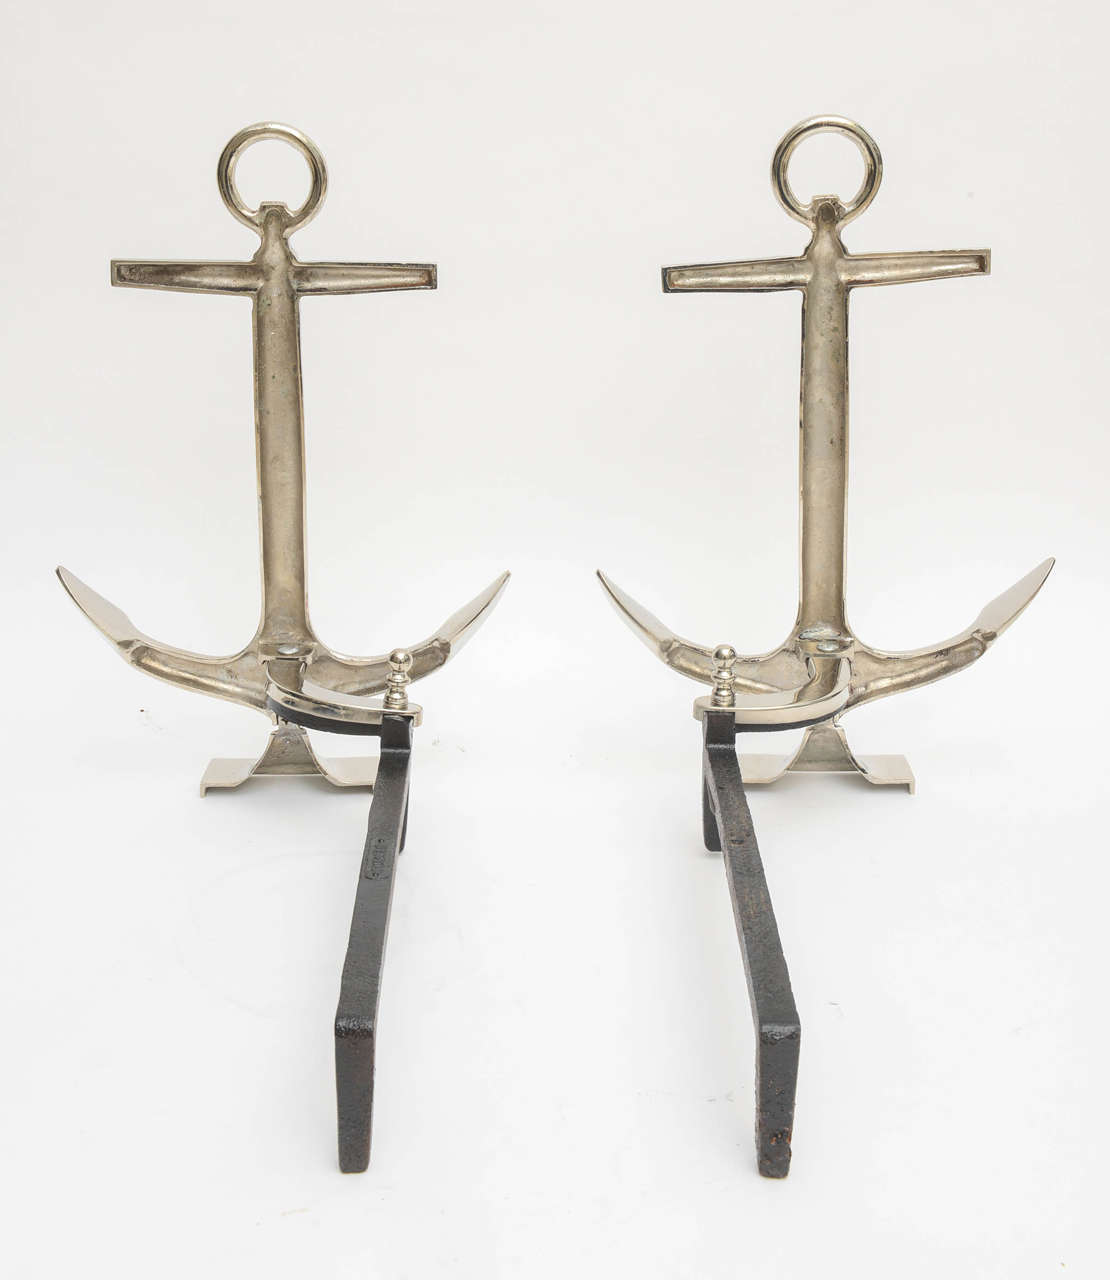 Pair of Nickel-Plated Anchor-Form Andirons by Puritan 2